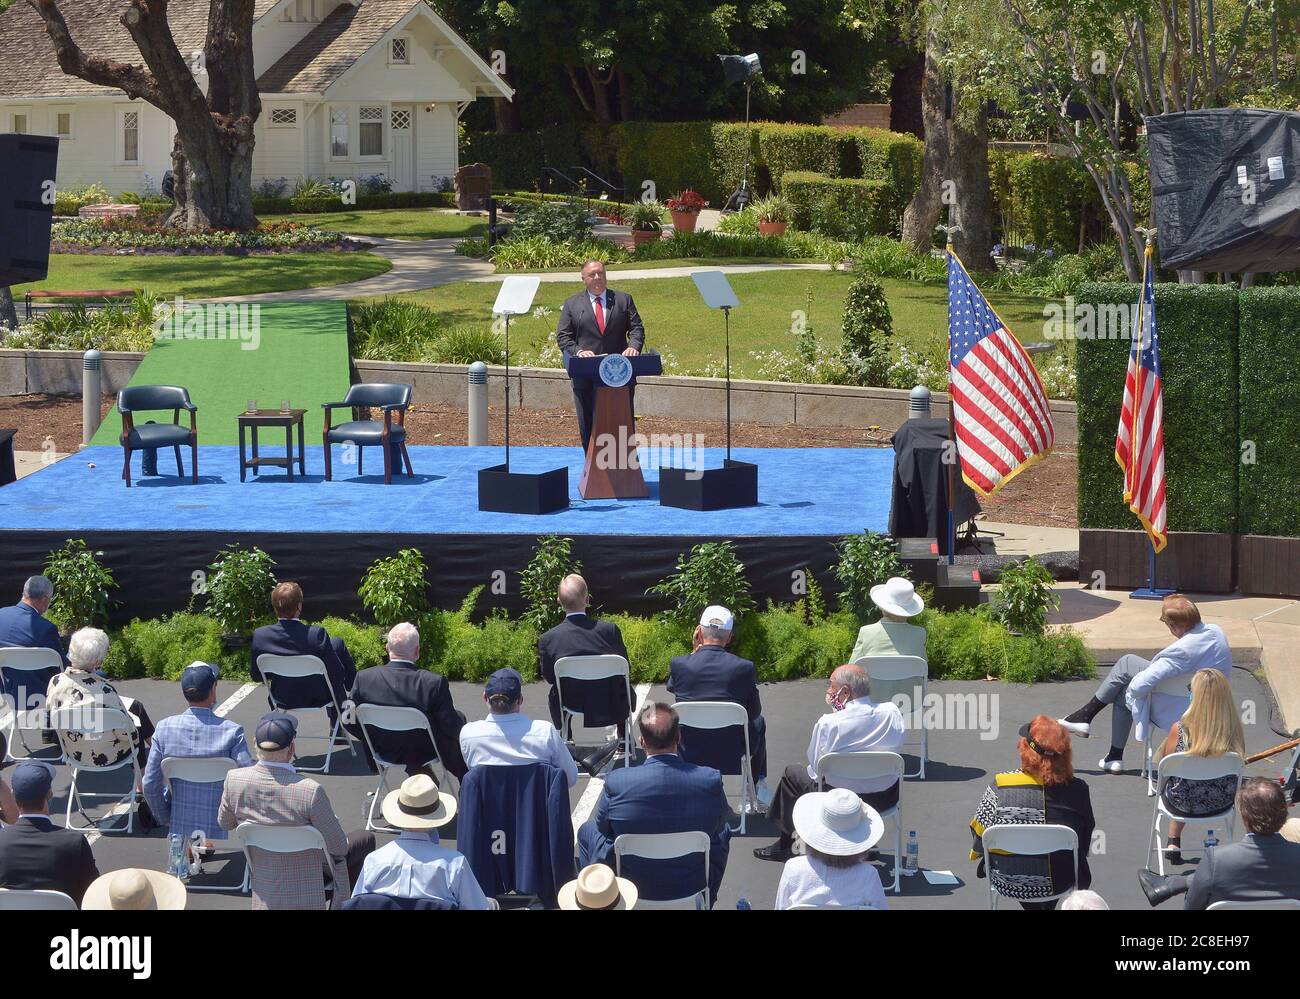 Yorba Linda, United States. 23rd July, 2020. U.S. Secretary of State Mike Pompeo delivers a major policy address on U.S.-China relations at the Richard Nixon Presidential Library in Yorba Linda, California on Thursday, July 23, 2020. Pompeo declared U.S. engagement with China is a dismal failure, fifty years after Nixon's historic 1972 trip to China. At rear is the house Nixon was born and raised in. Photo by Jim Ruymen/UPI Credit: UPI/Alamy Live News Stock Photo